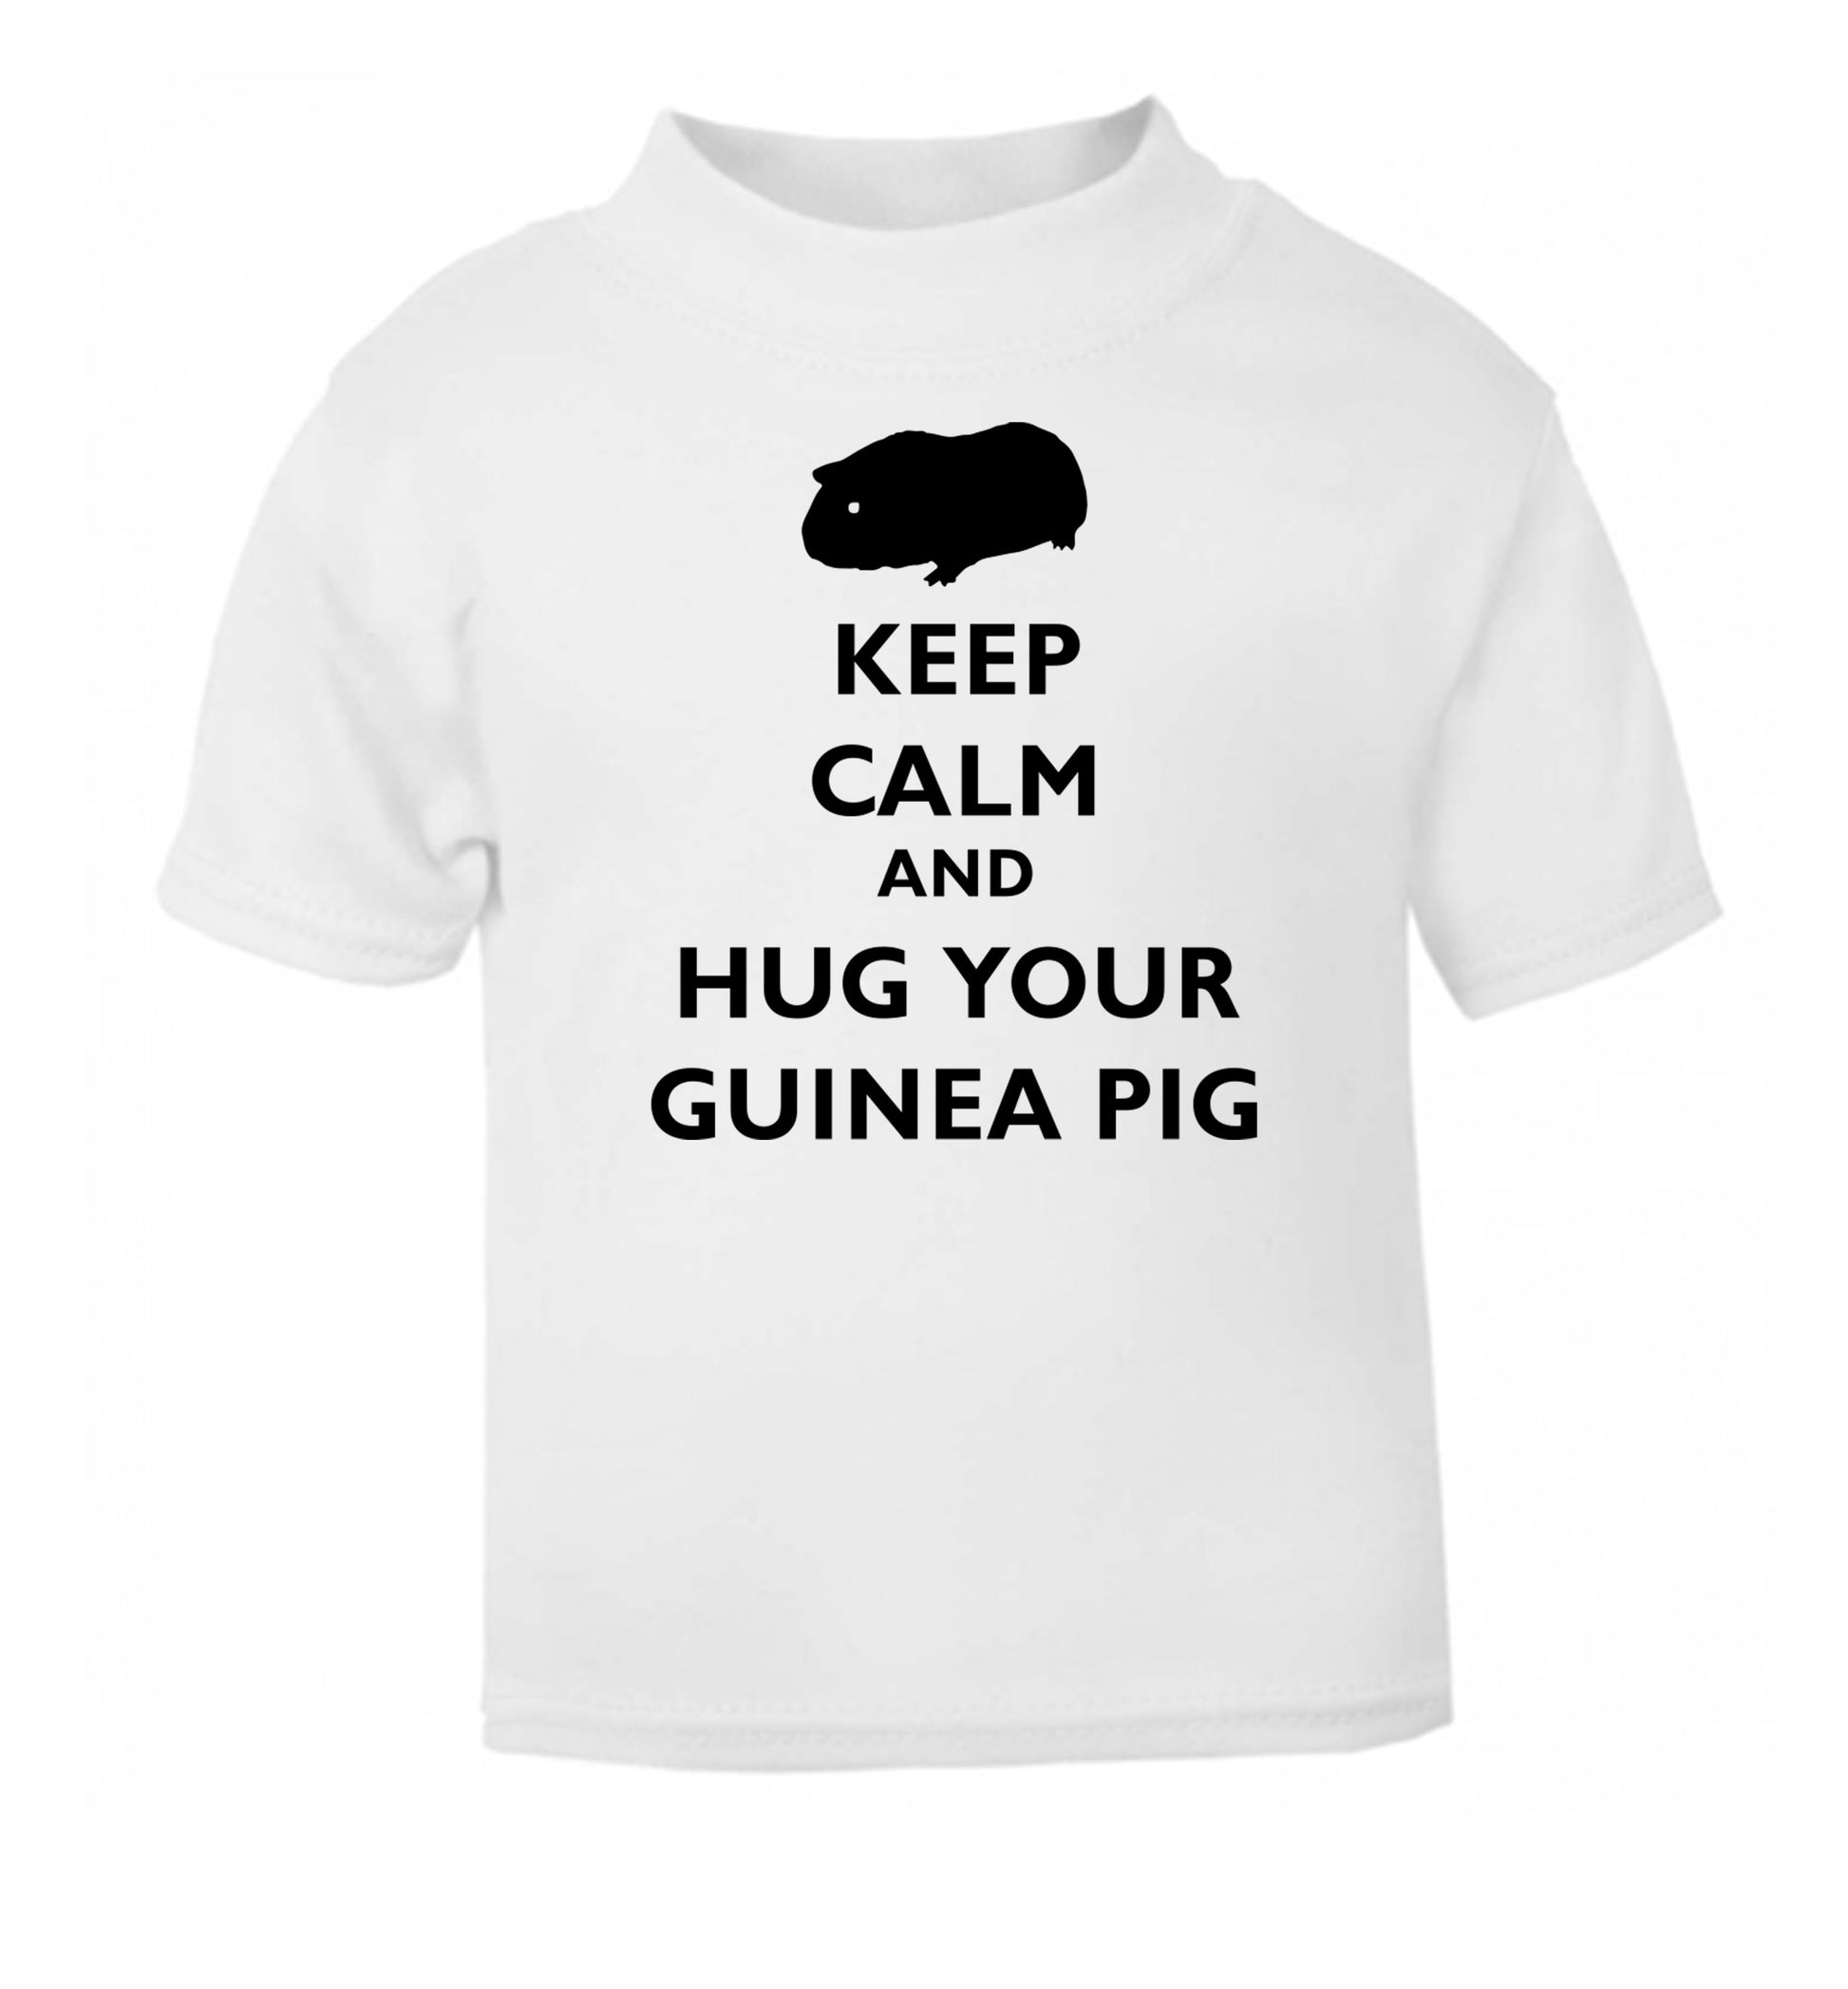 Keep calm and hug your guineapig white Baby Toddler Tshirt 2 Years